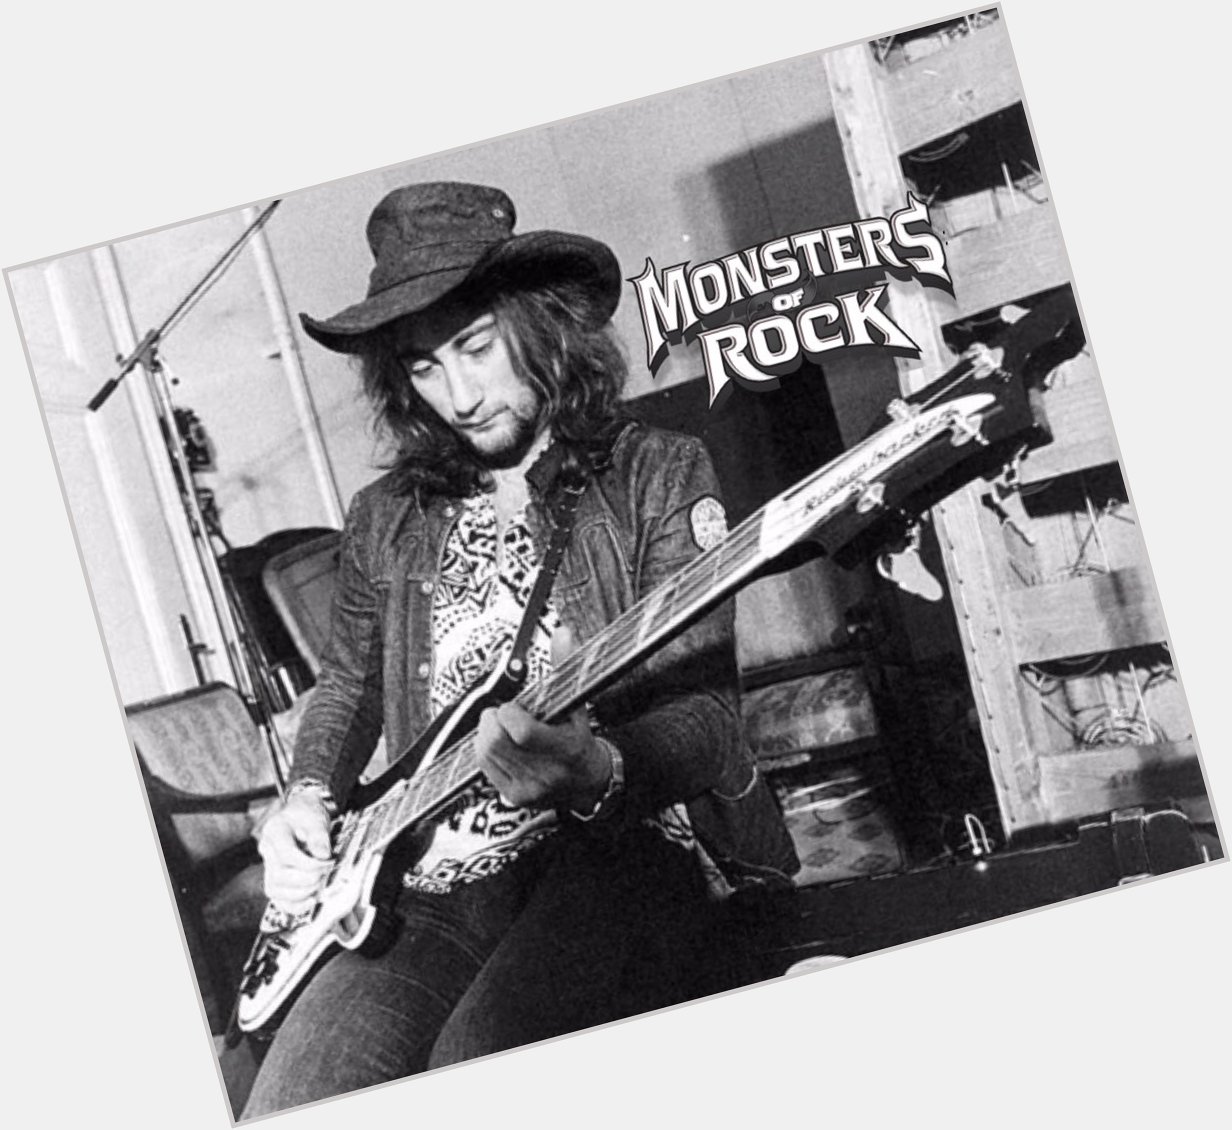 Happy birthday to the legendary Roger Glover of Deep Purple! The Monsters of Rock salutes you brother! Cheers! 